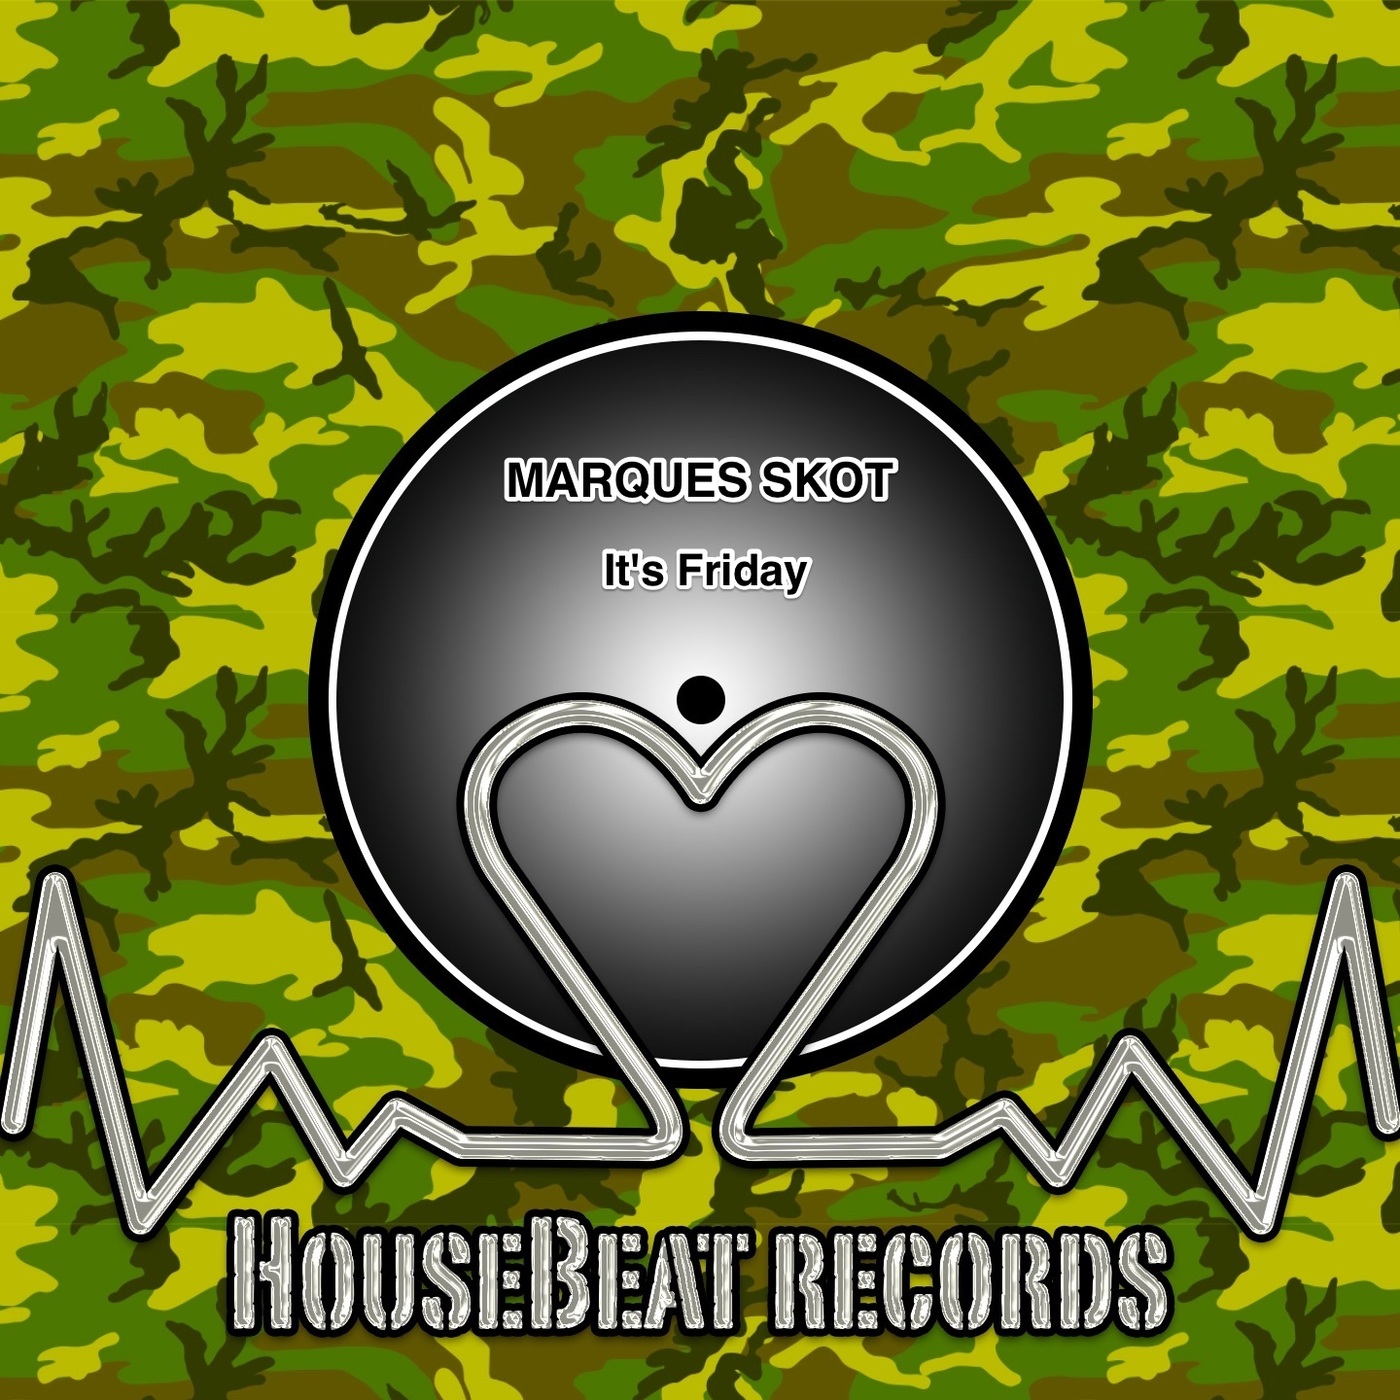 Marques Skot - It's Friday / HouseBeat Records